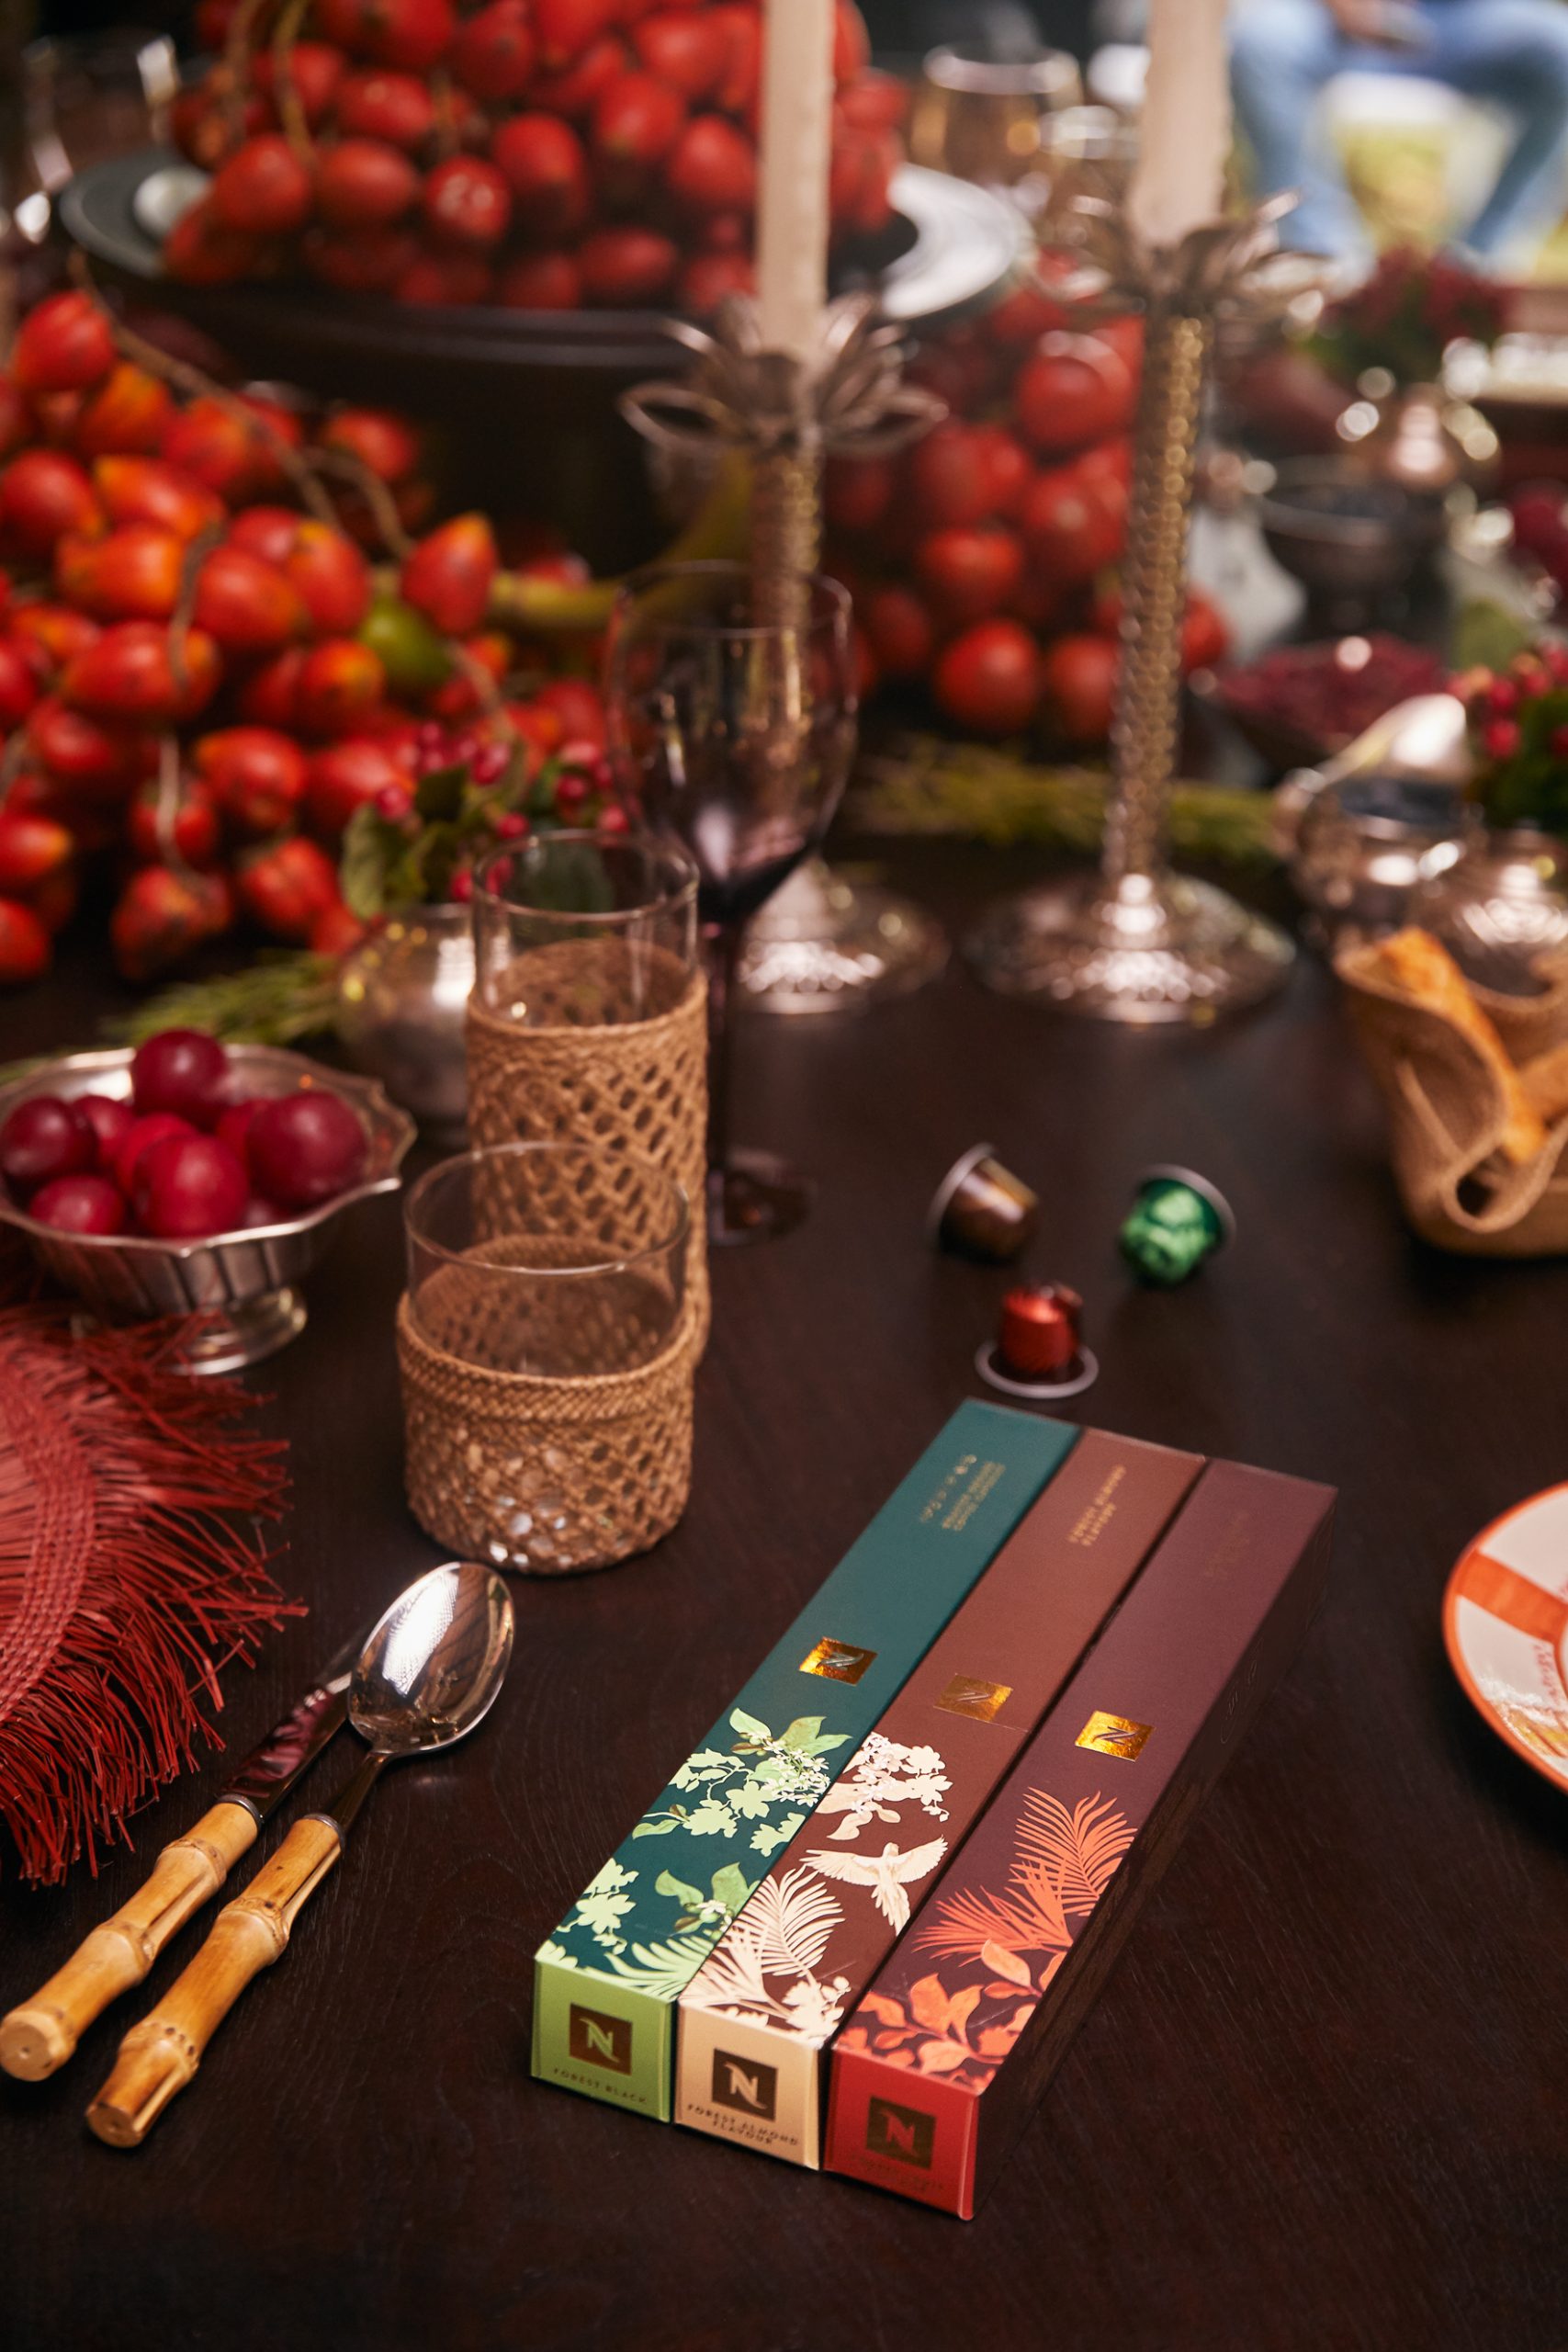 TIS THE SEASON FOR FESTIVE GIFTS BROUGHT TO YOU BY NESPRESSO